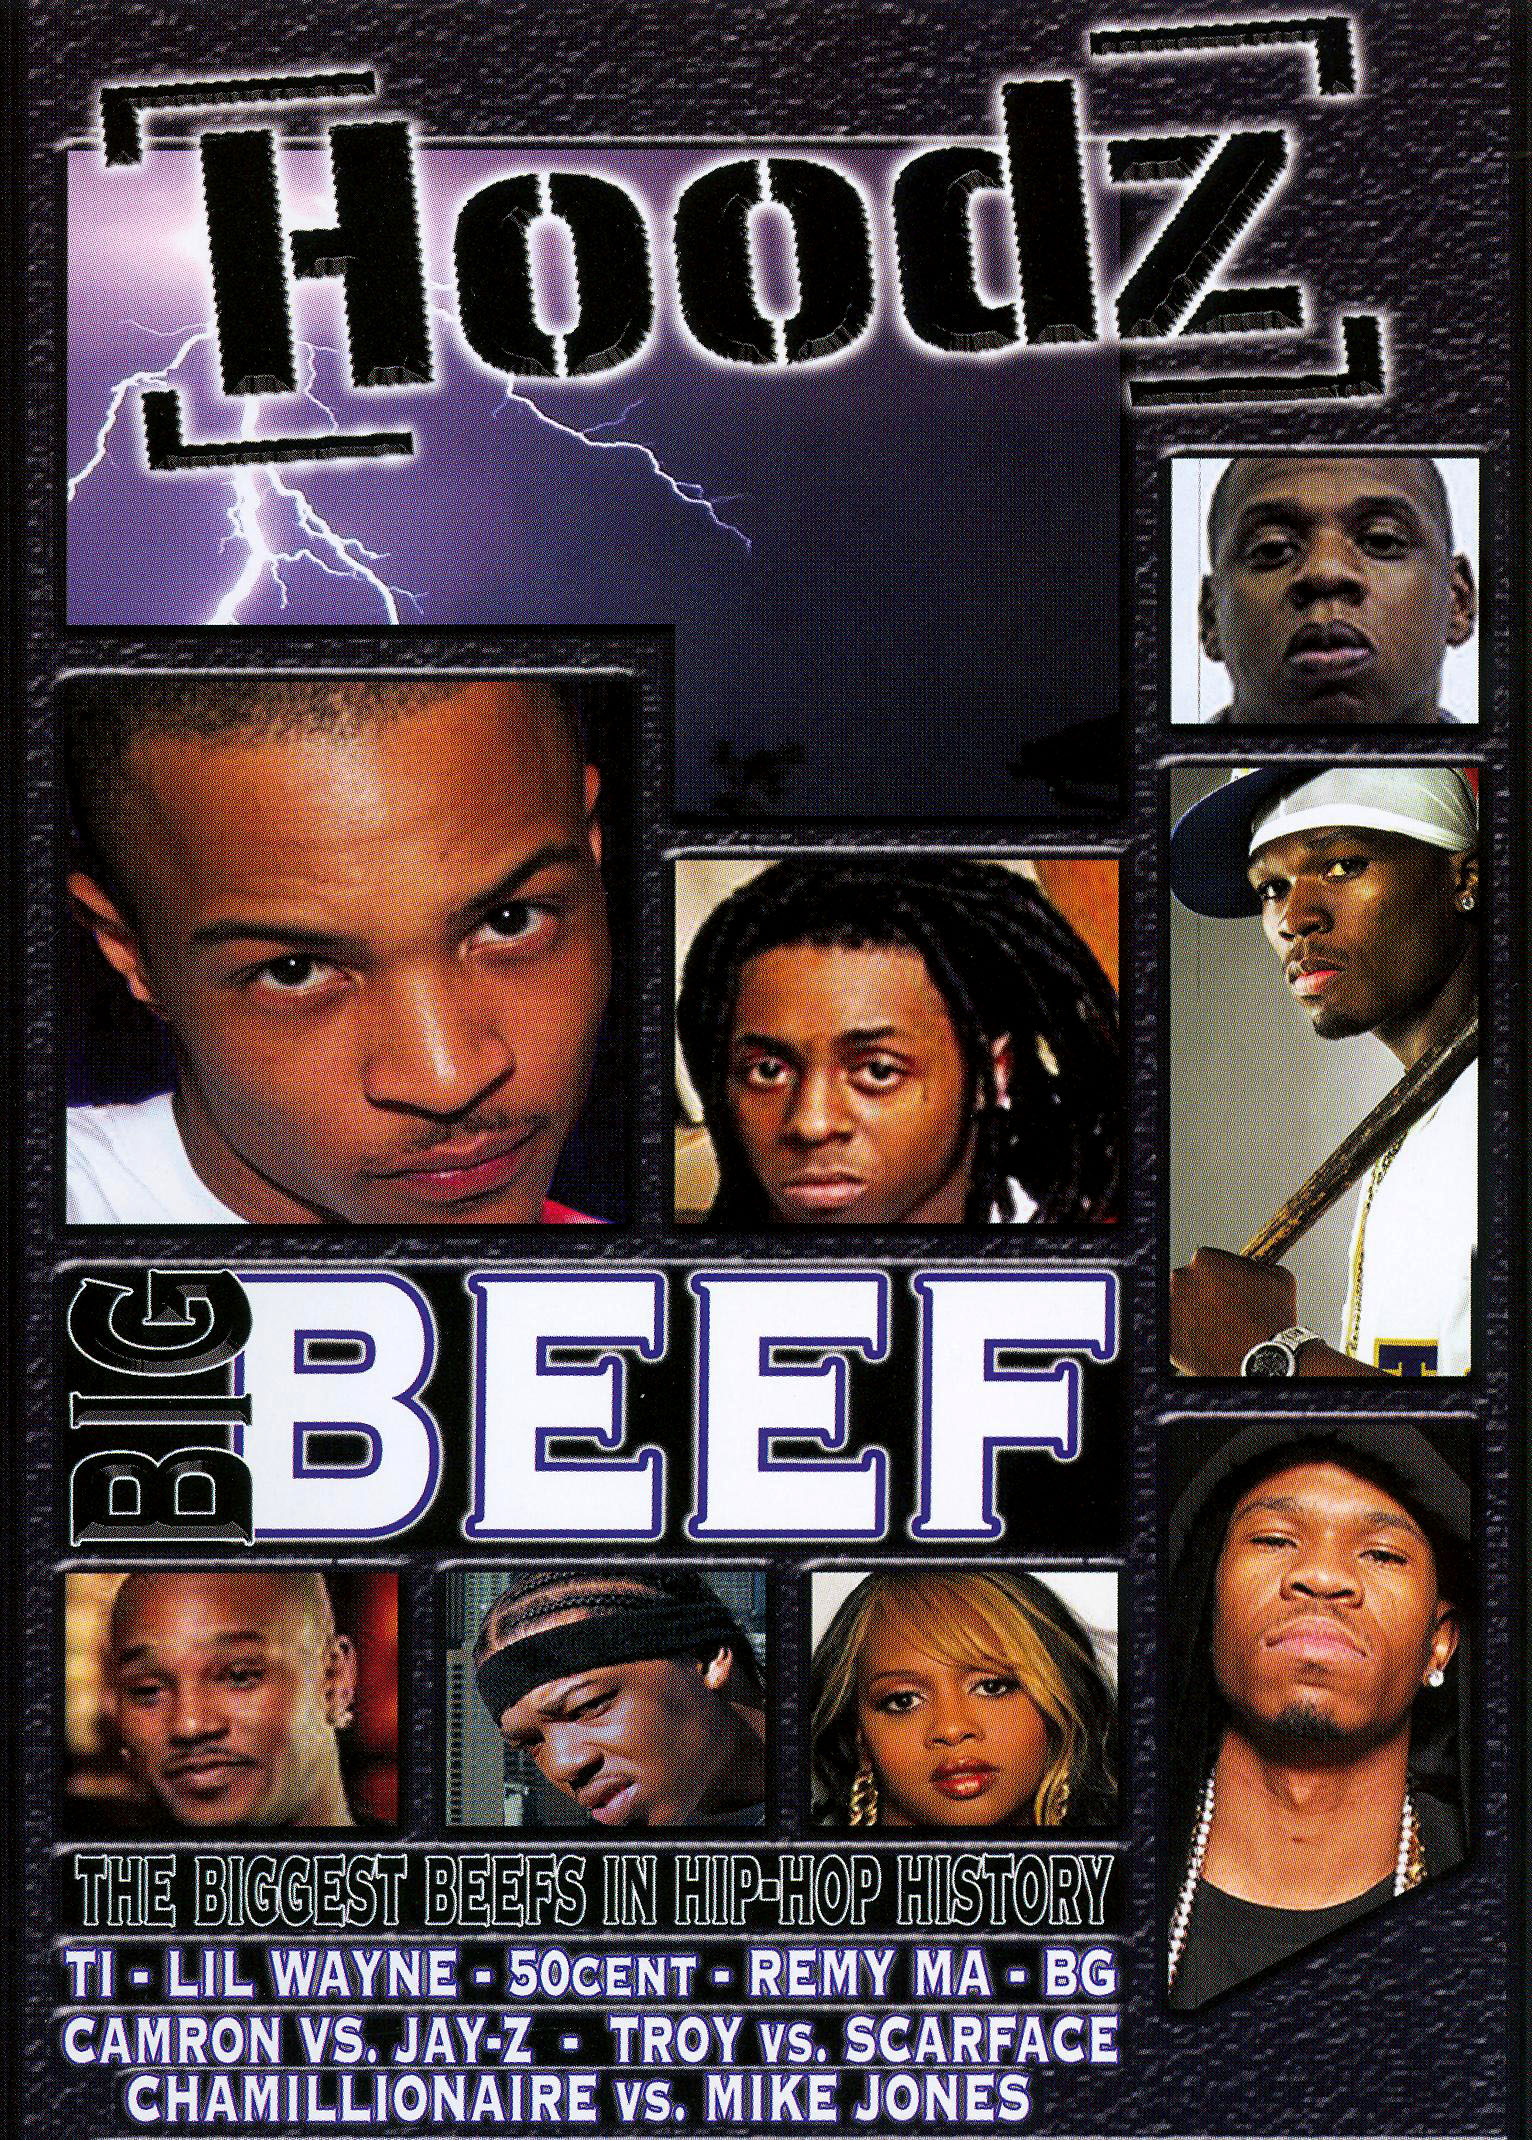 Hoodz: Big Beef - | Synopsis, Characteristics, Moods, Themes and Related | AllMovie1532 x 2140